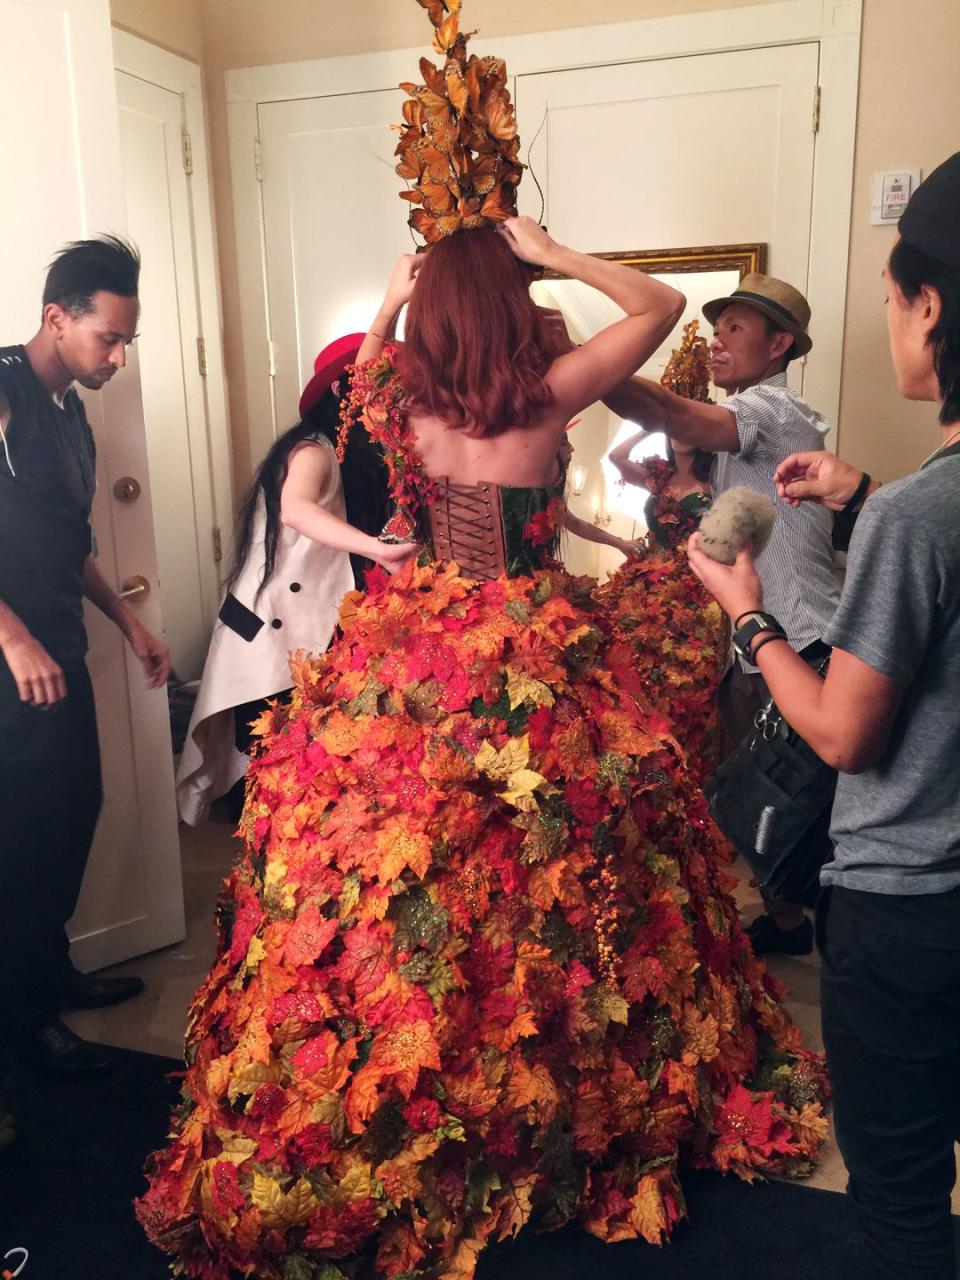 Katy Perry Plus 1: The Pop Star Gets Ready for Bazaar Icons